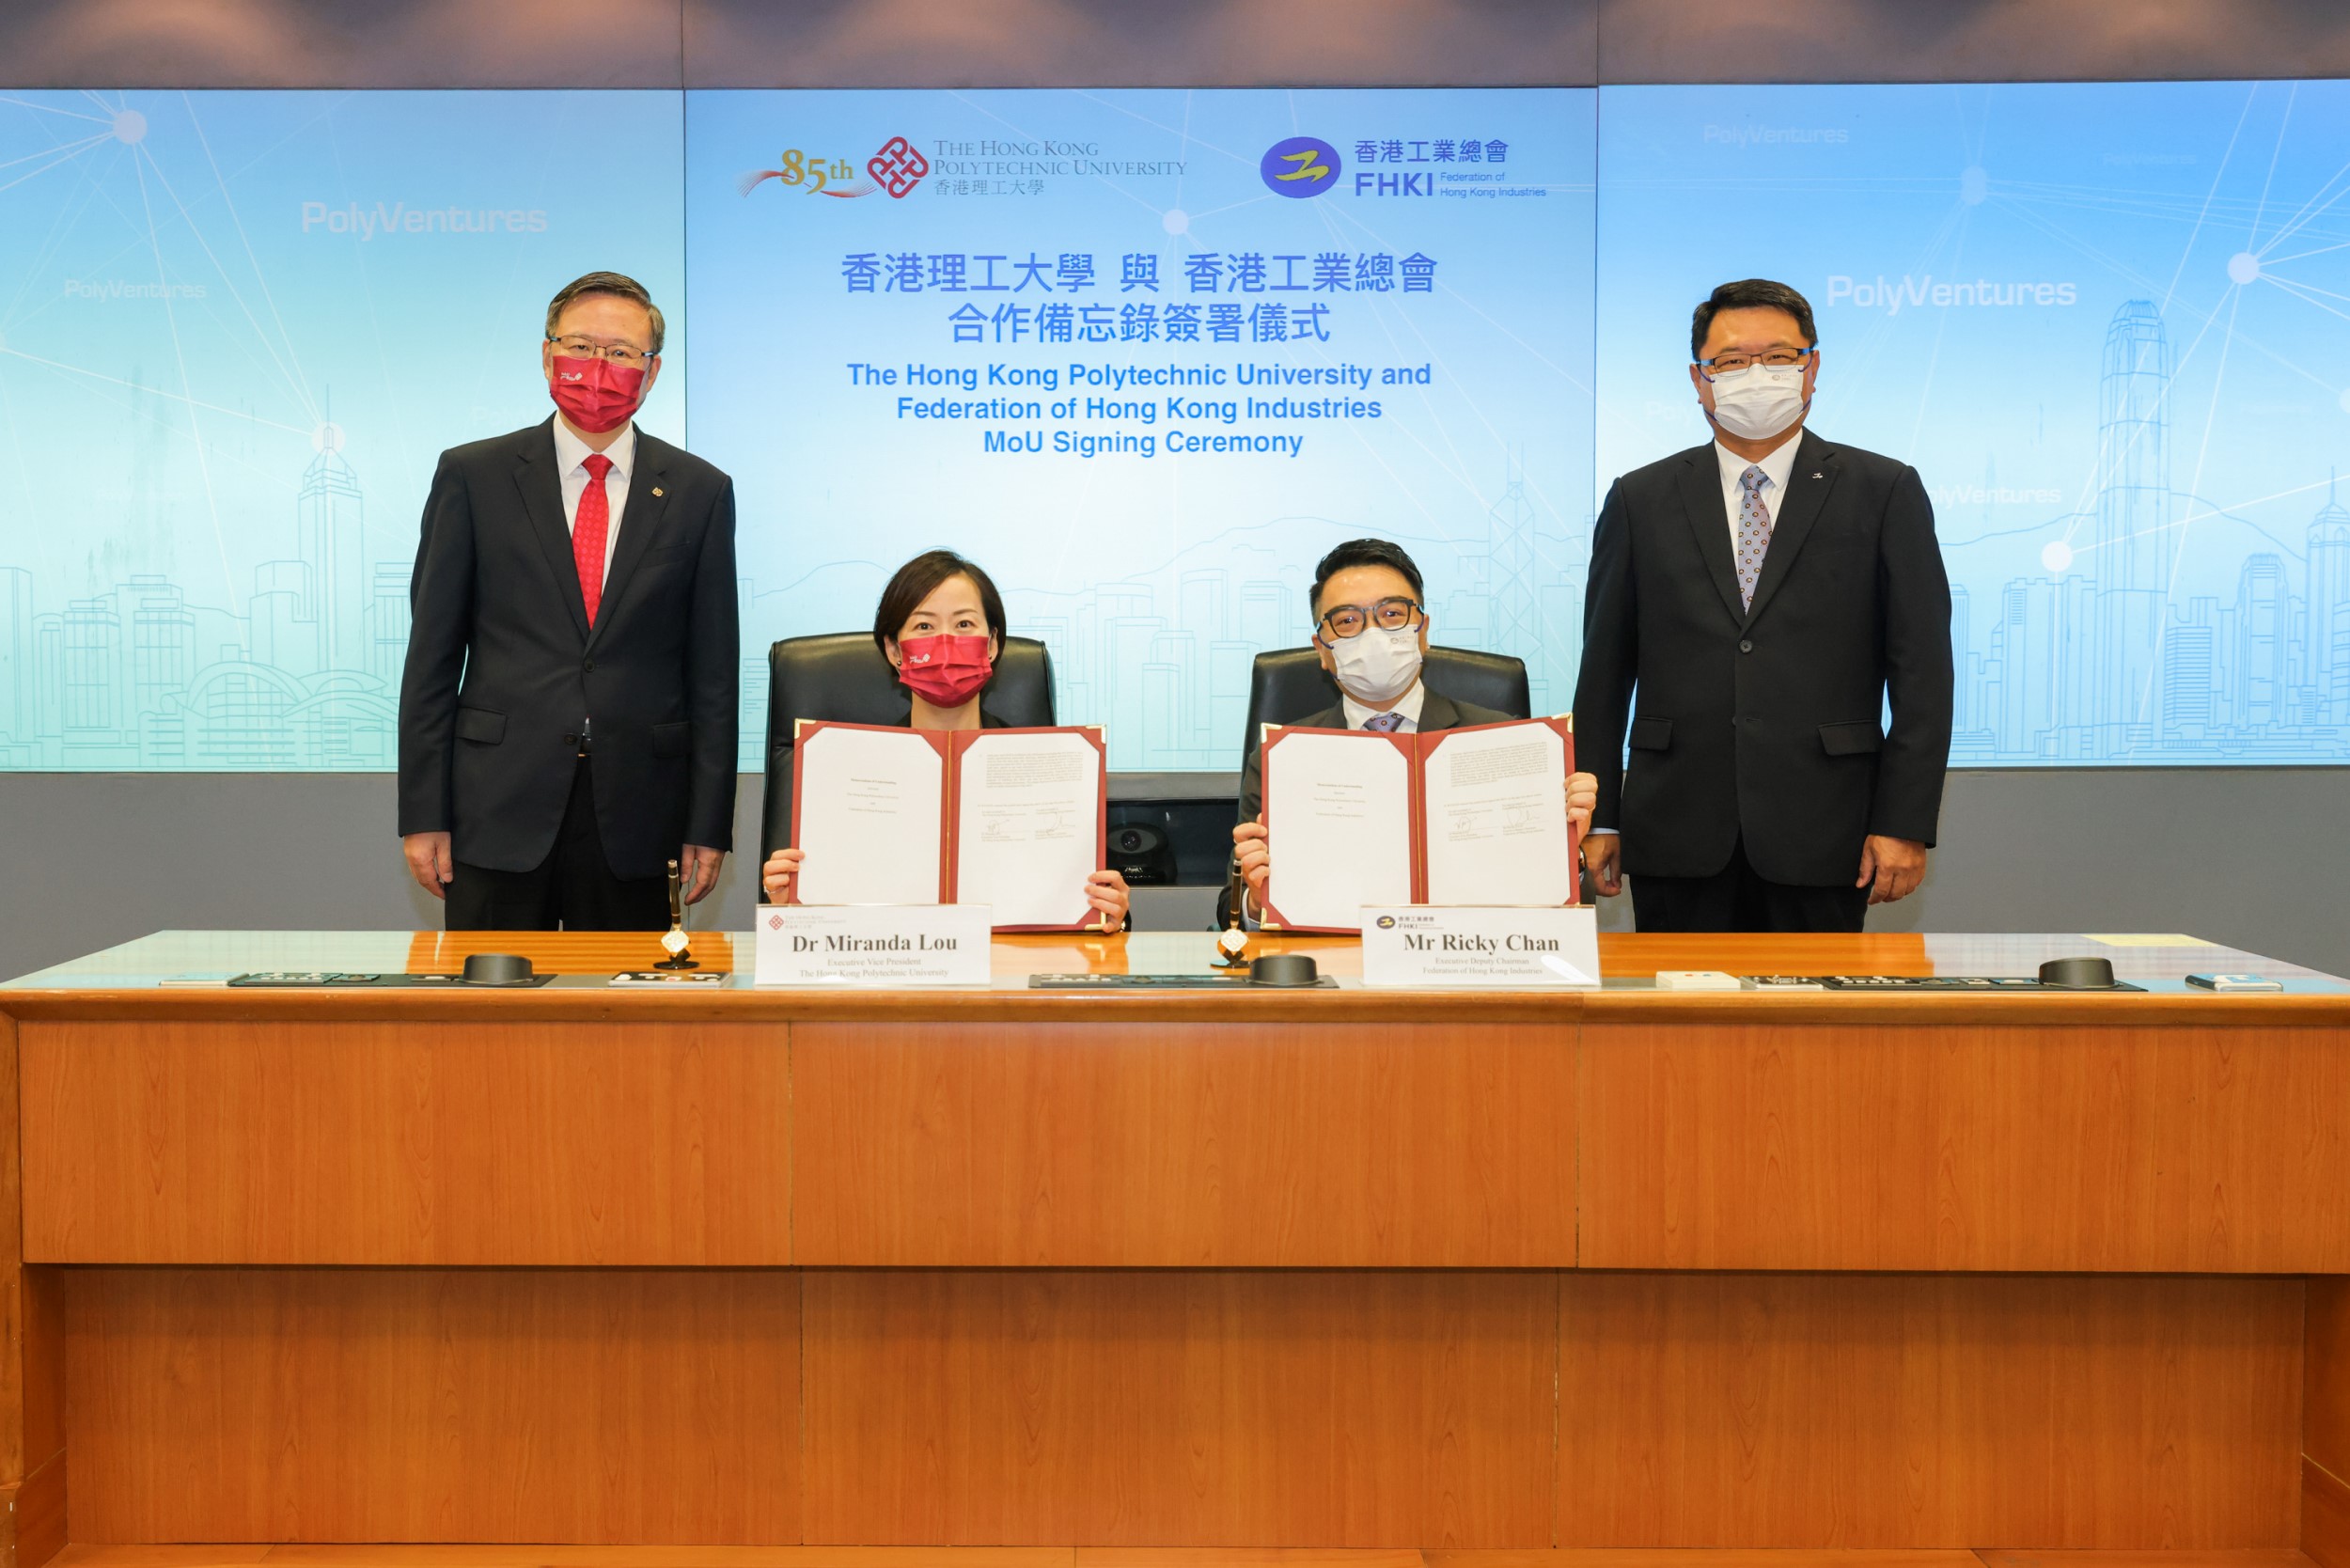 Dr Miranda LOU, Executive Vice President of PolyU (second from left), and Mr Ricky CHAN Executive Deputy Chairman of FHKI (second from right) signed the MoU, witnessed by Professor Jin-Guang TENG, President of PolyU (left) and Dr Sunny CHAI, Chairman of FHKI (right).